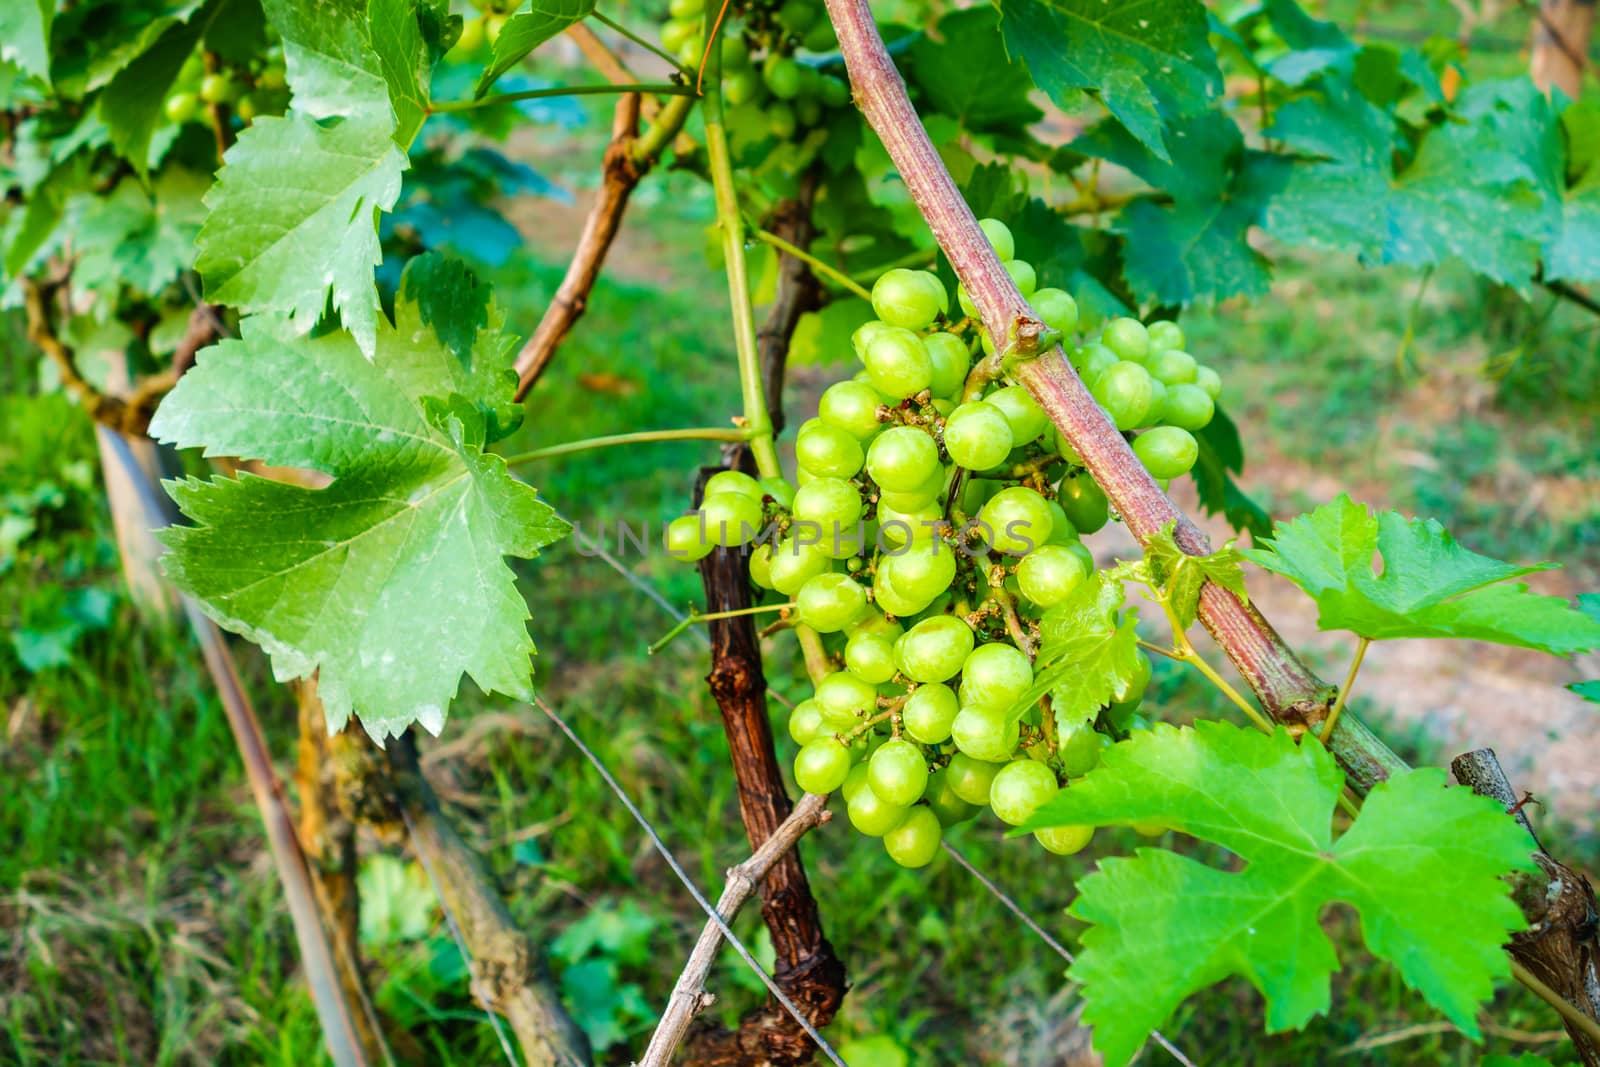 Bunch of green grapes on a vine